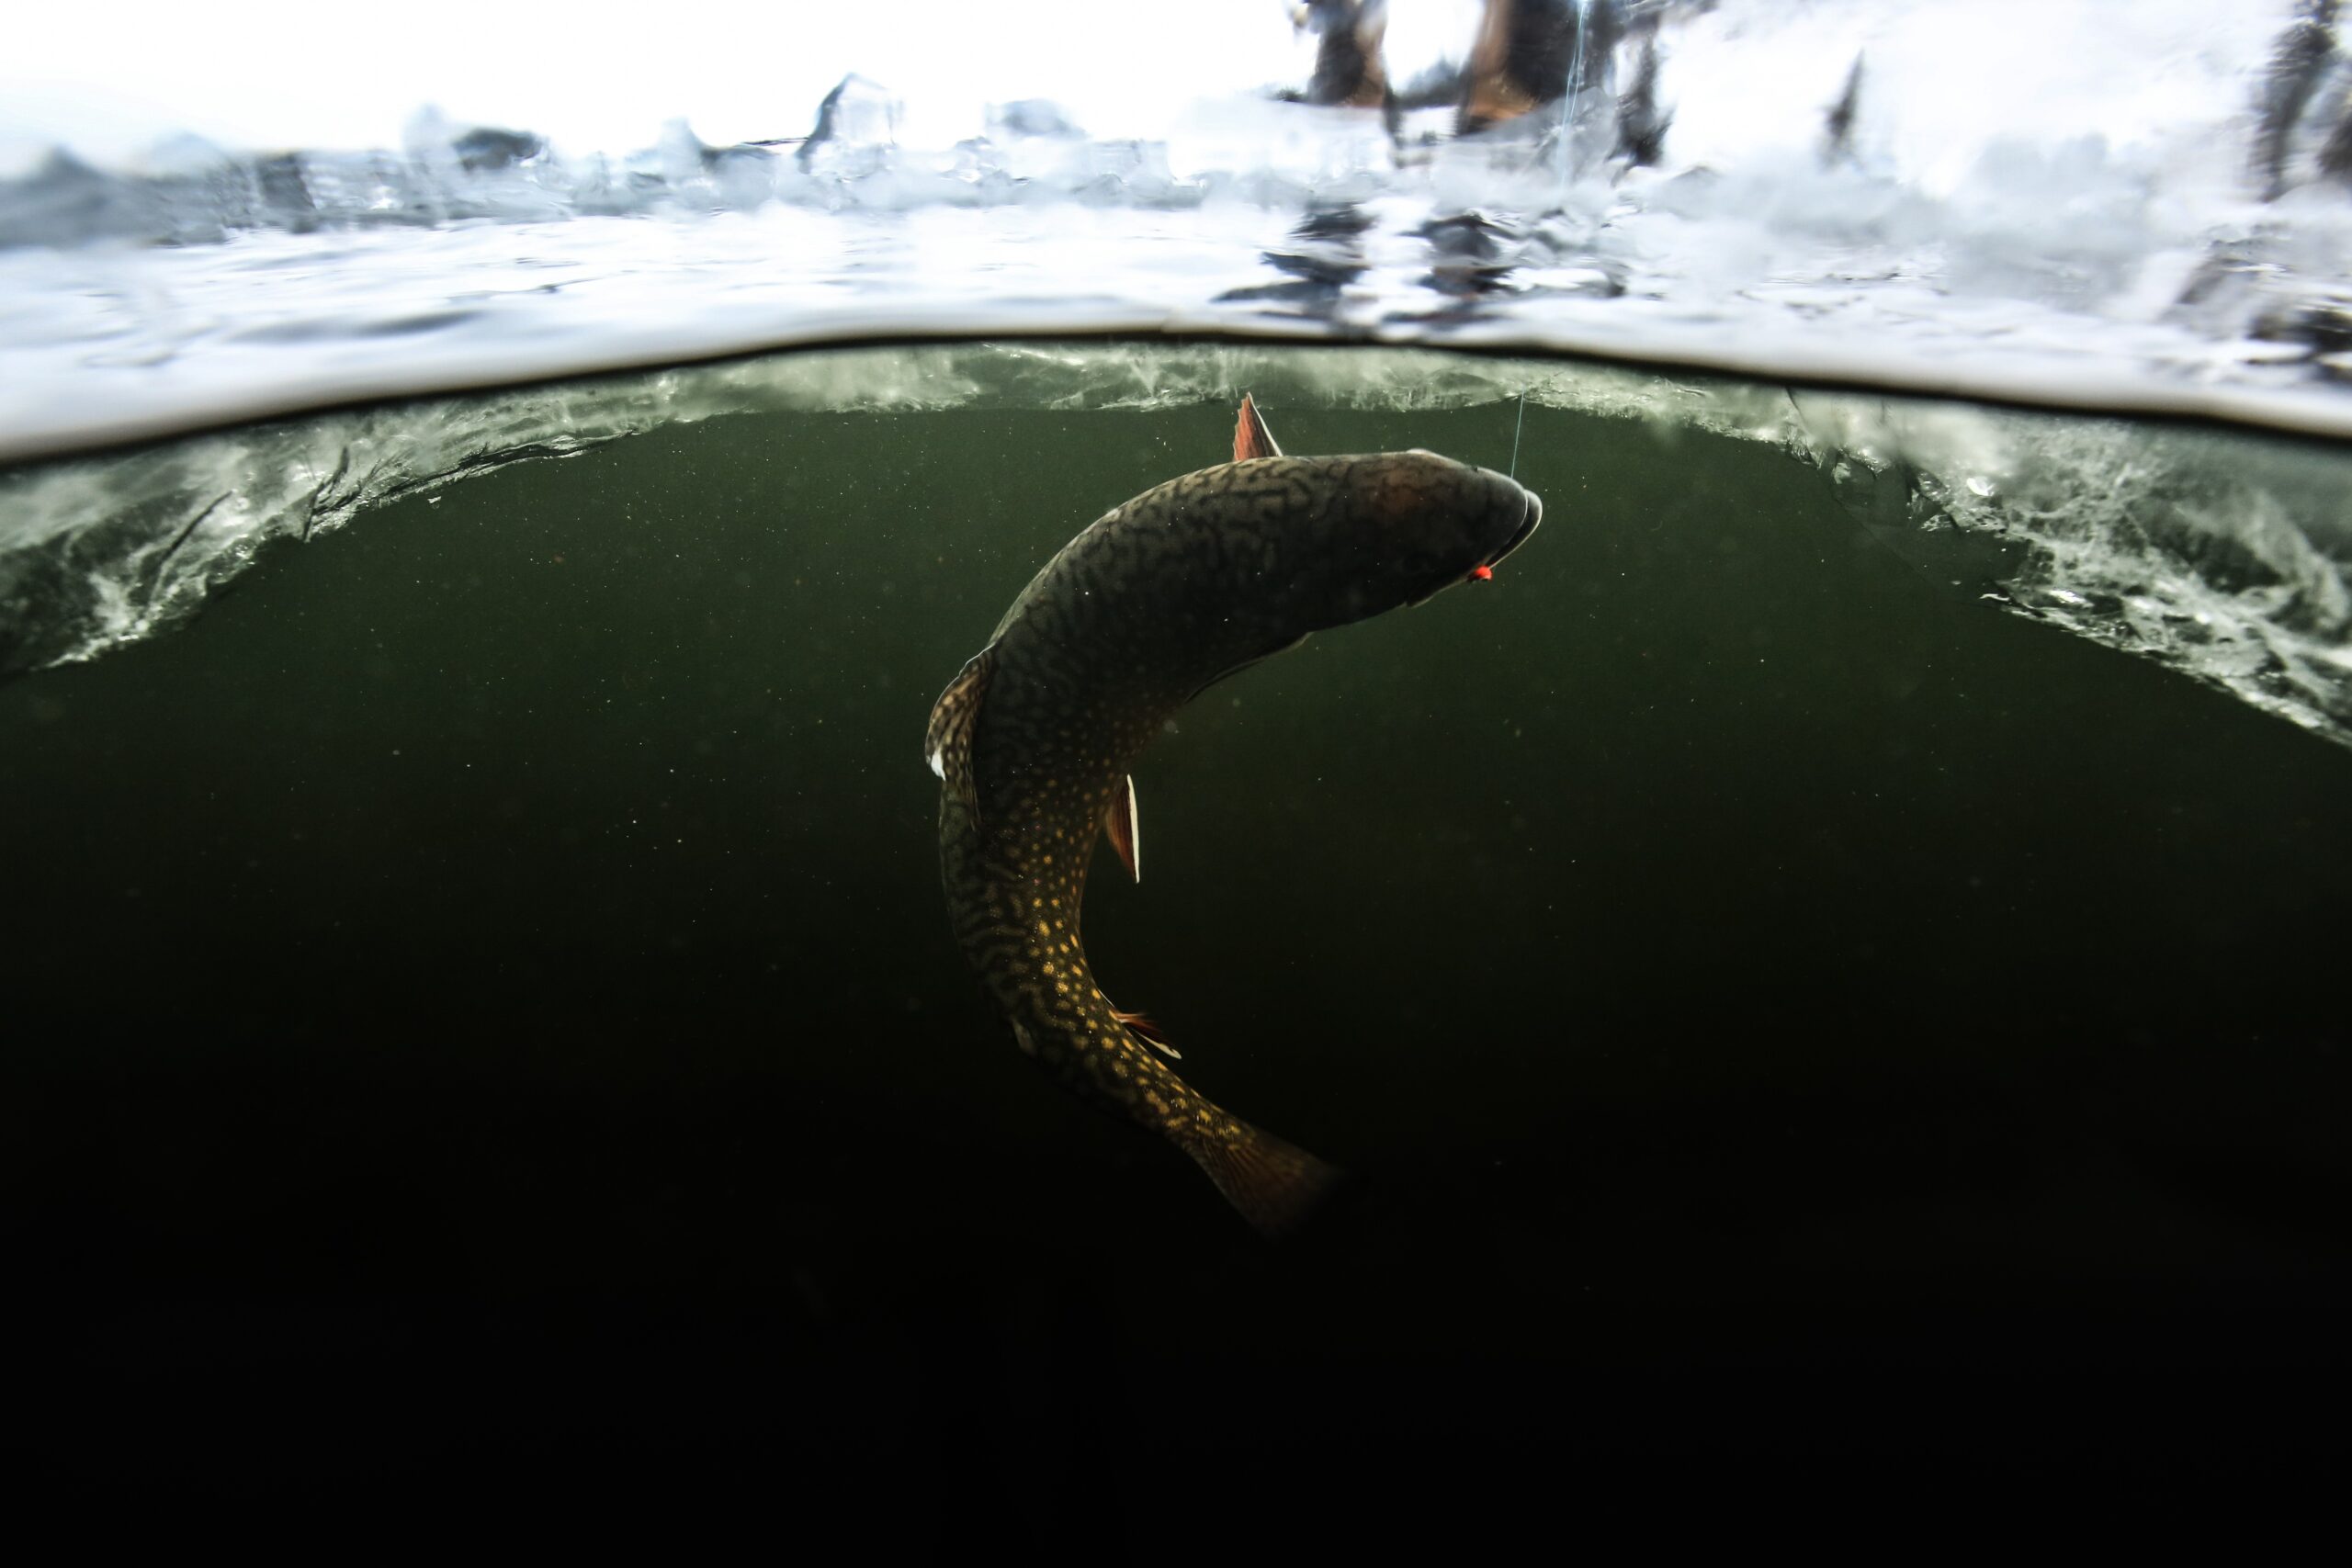 Ice-Fishing for Eastern Brook Trout - Go Fish BC